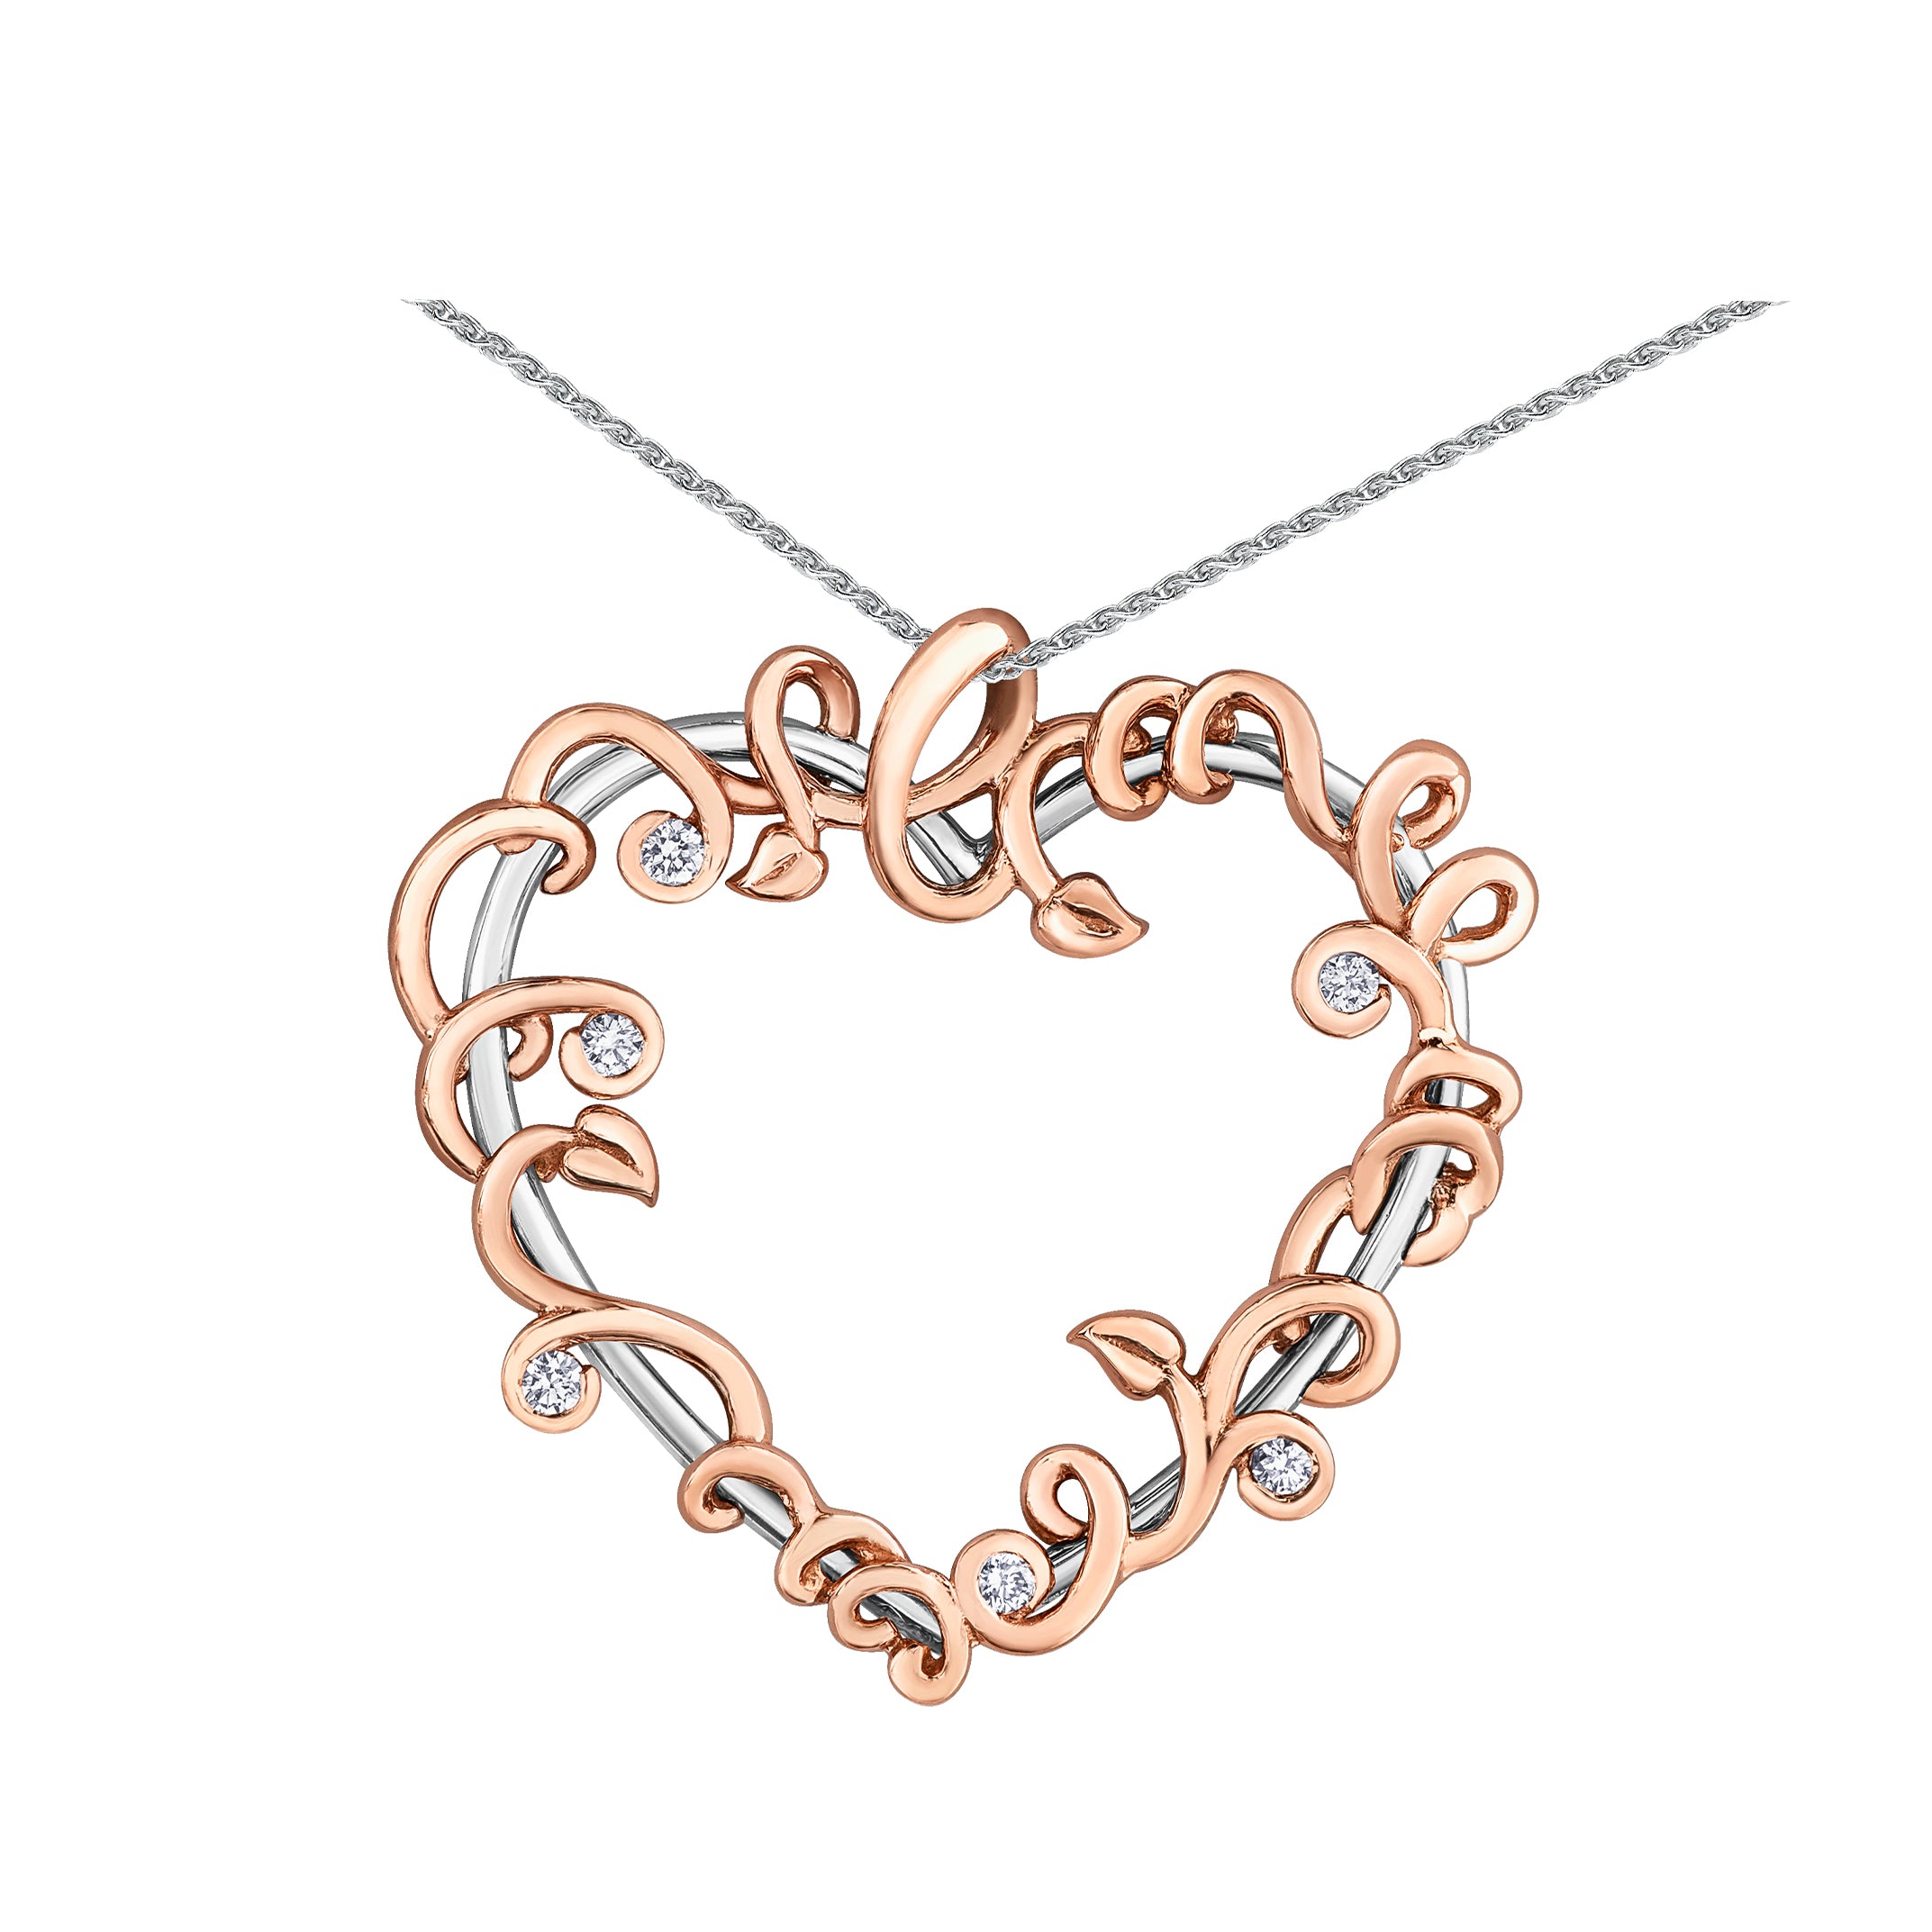  Crafted in 14KT white Canadian Certified Gold, this heart shaped pendant is  wrapped with 14KT rose Canadian Certified Gold vines set with round brilliant-cut Canadian diamonds.